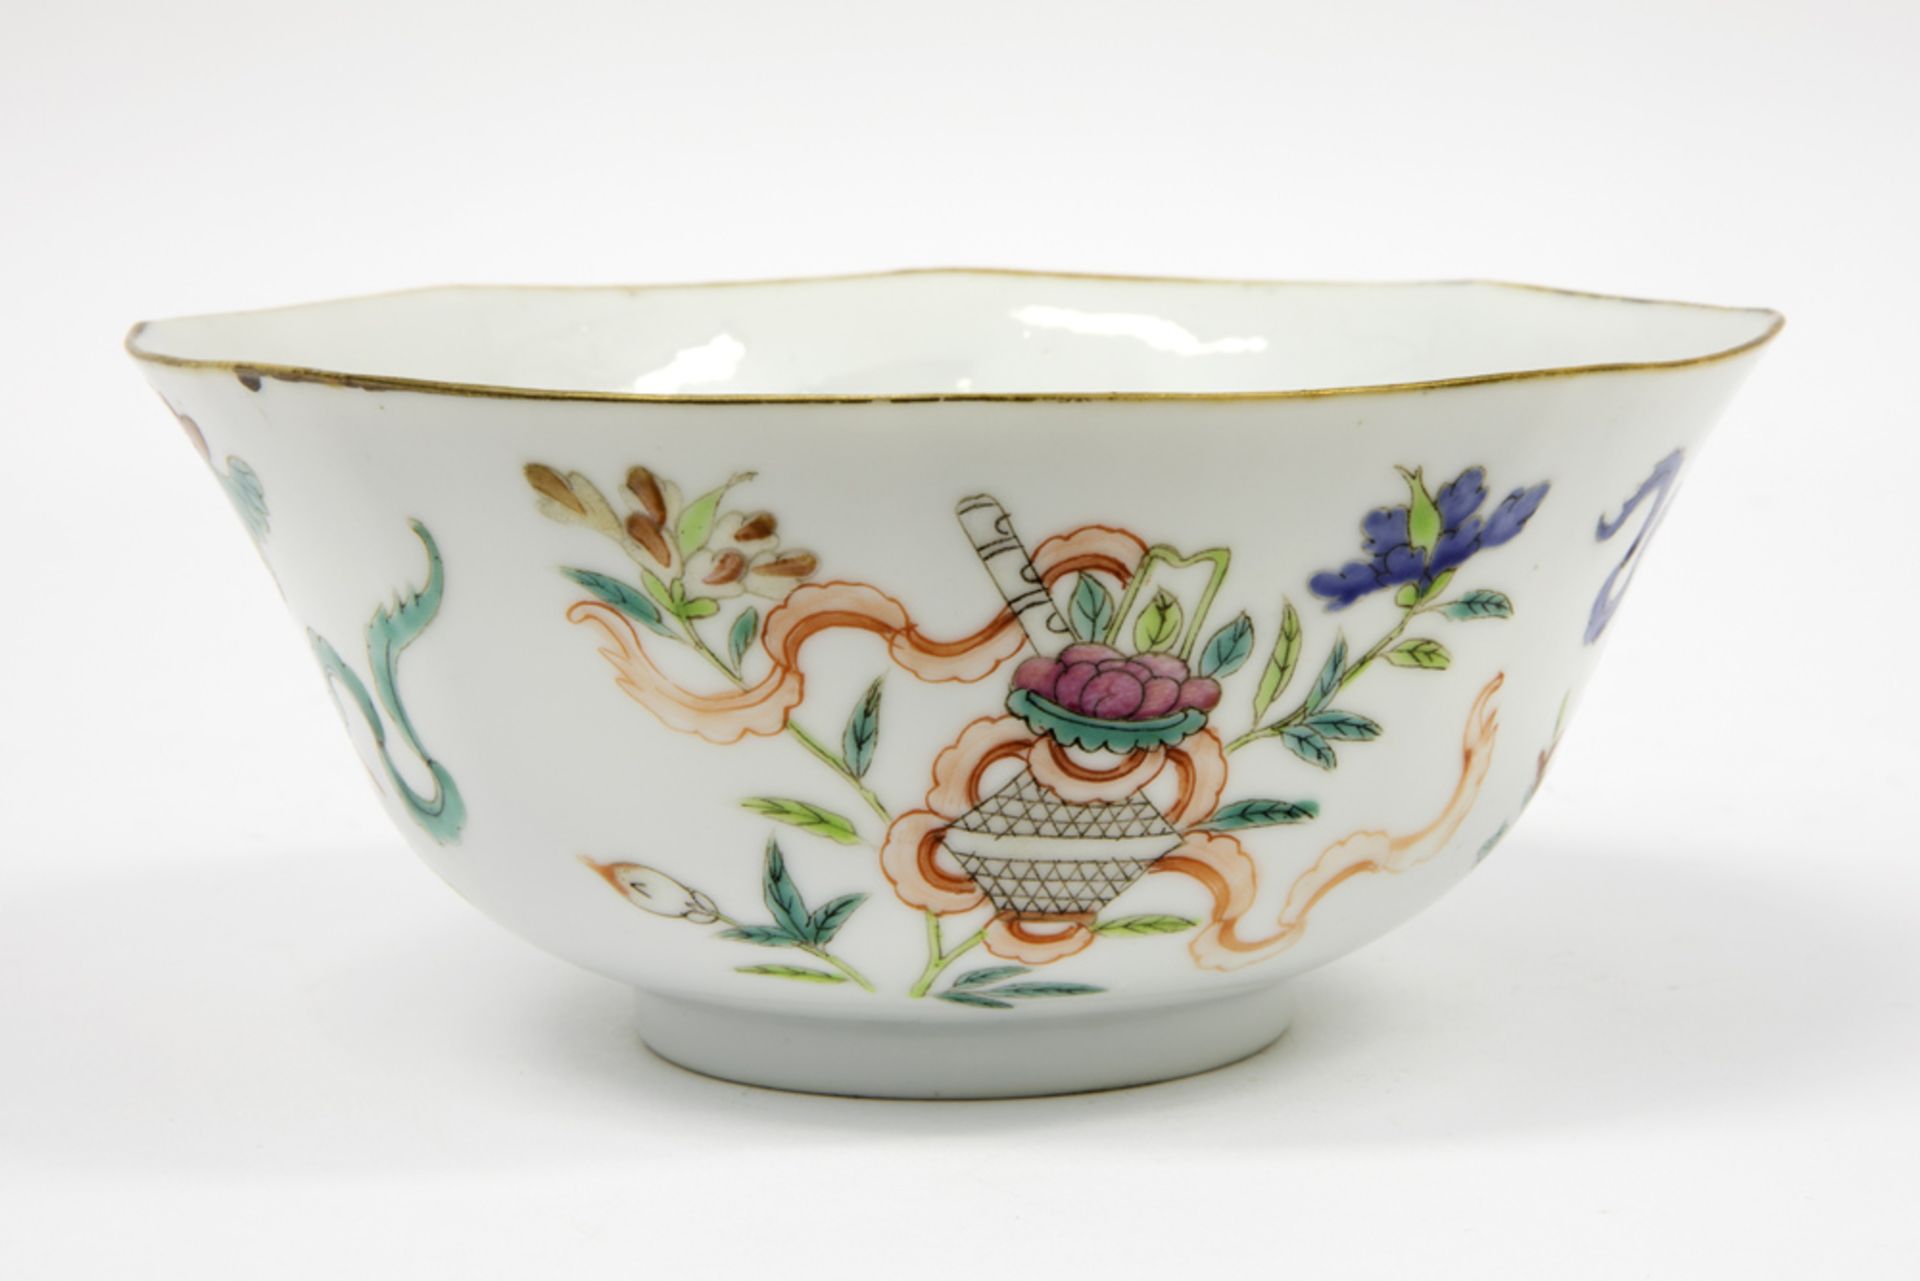 19th Cent. Chinese bowl in Hsien Feng (Xian Feng) marked porcelain with a polychrome decor || - Image 3 of 7